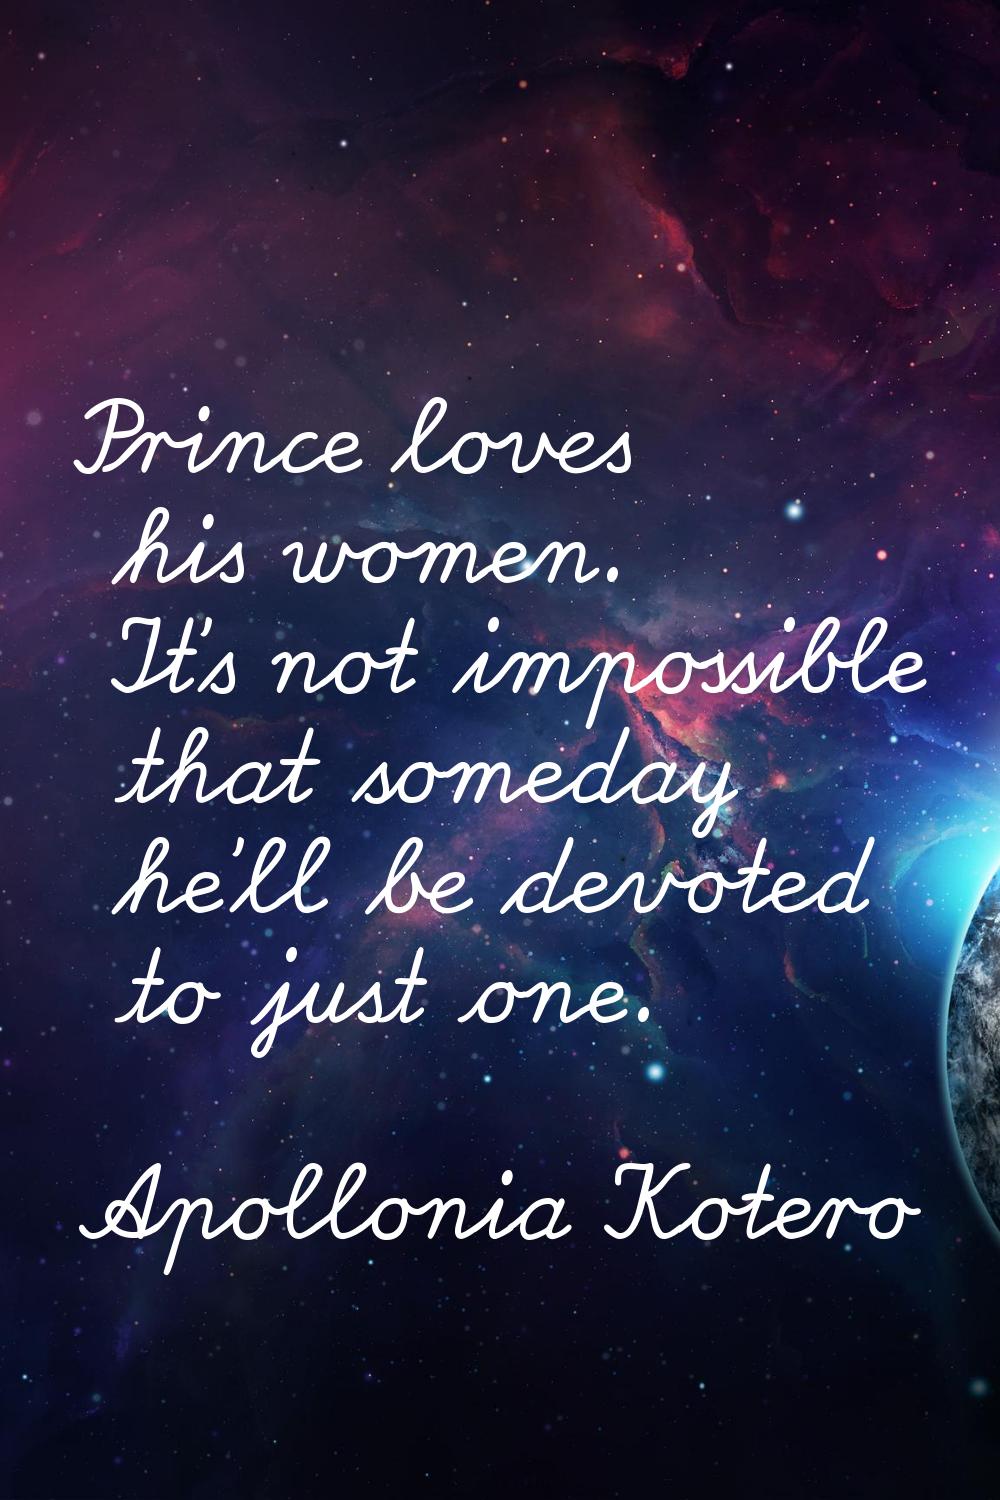 Prince loves his women. It's not impossible that someday he'll be devoted to just one.